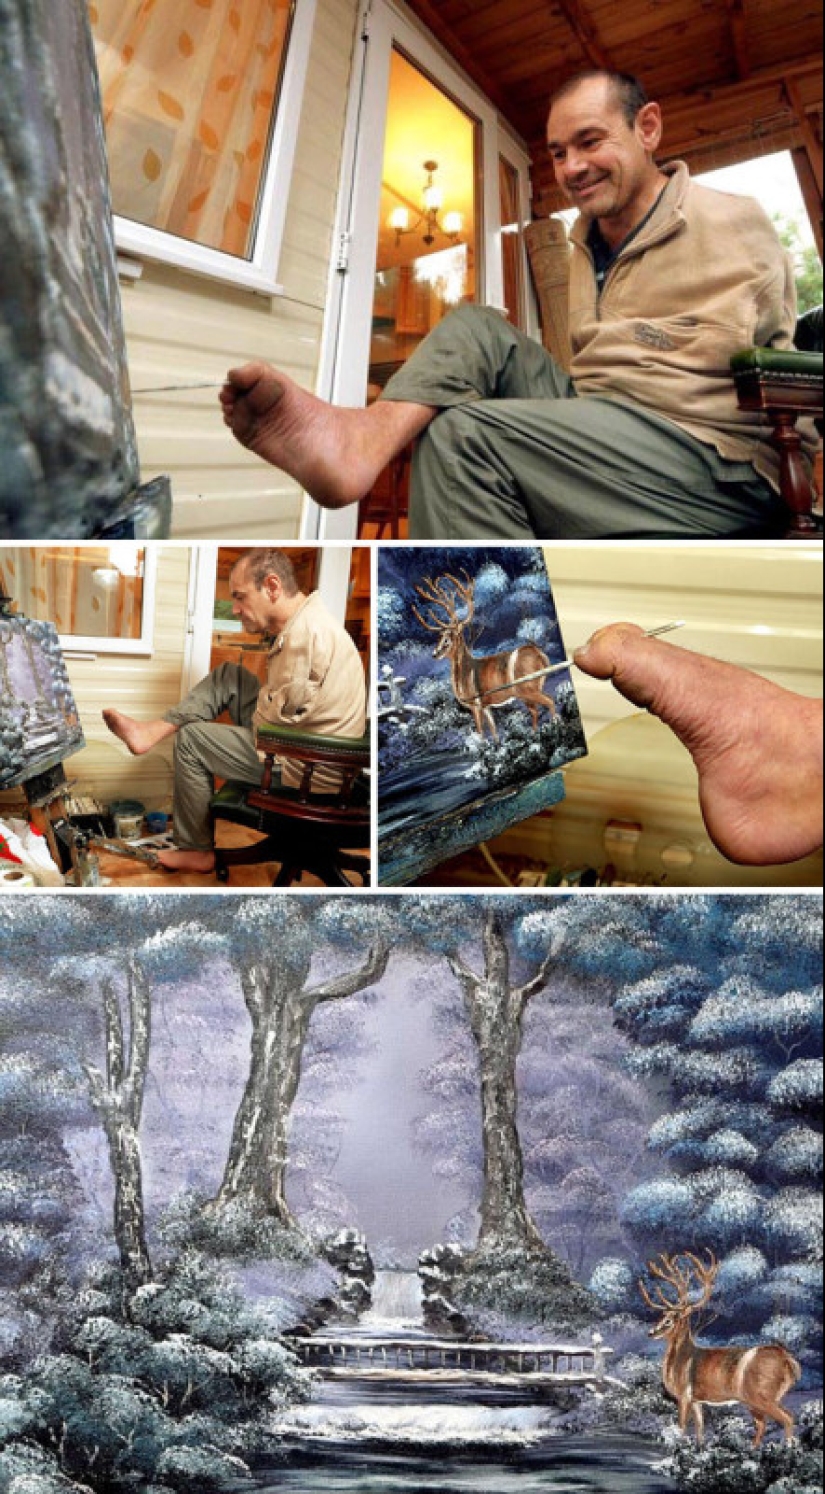 Artists with disabilities who have amazed the world with their talents